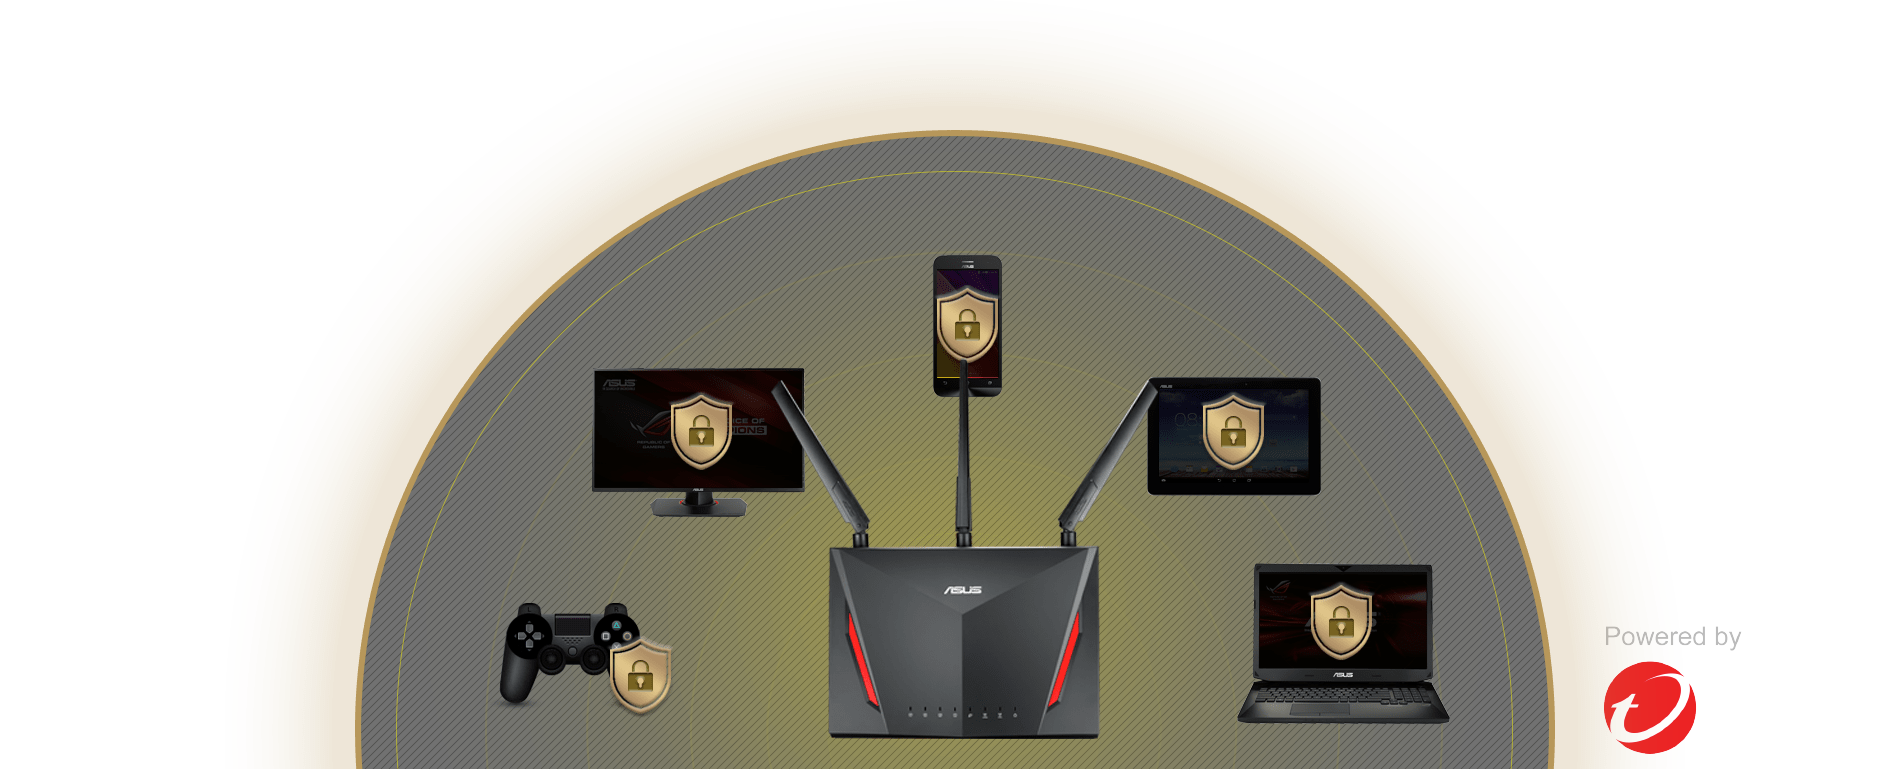 ASUS RT-AC86U router features AiProtection providing internet security for all connected devices